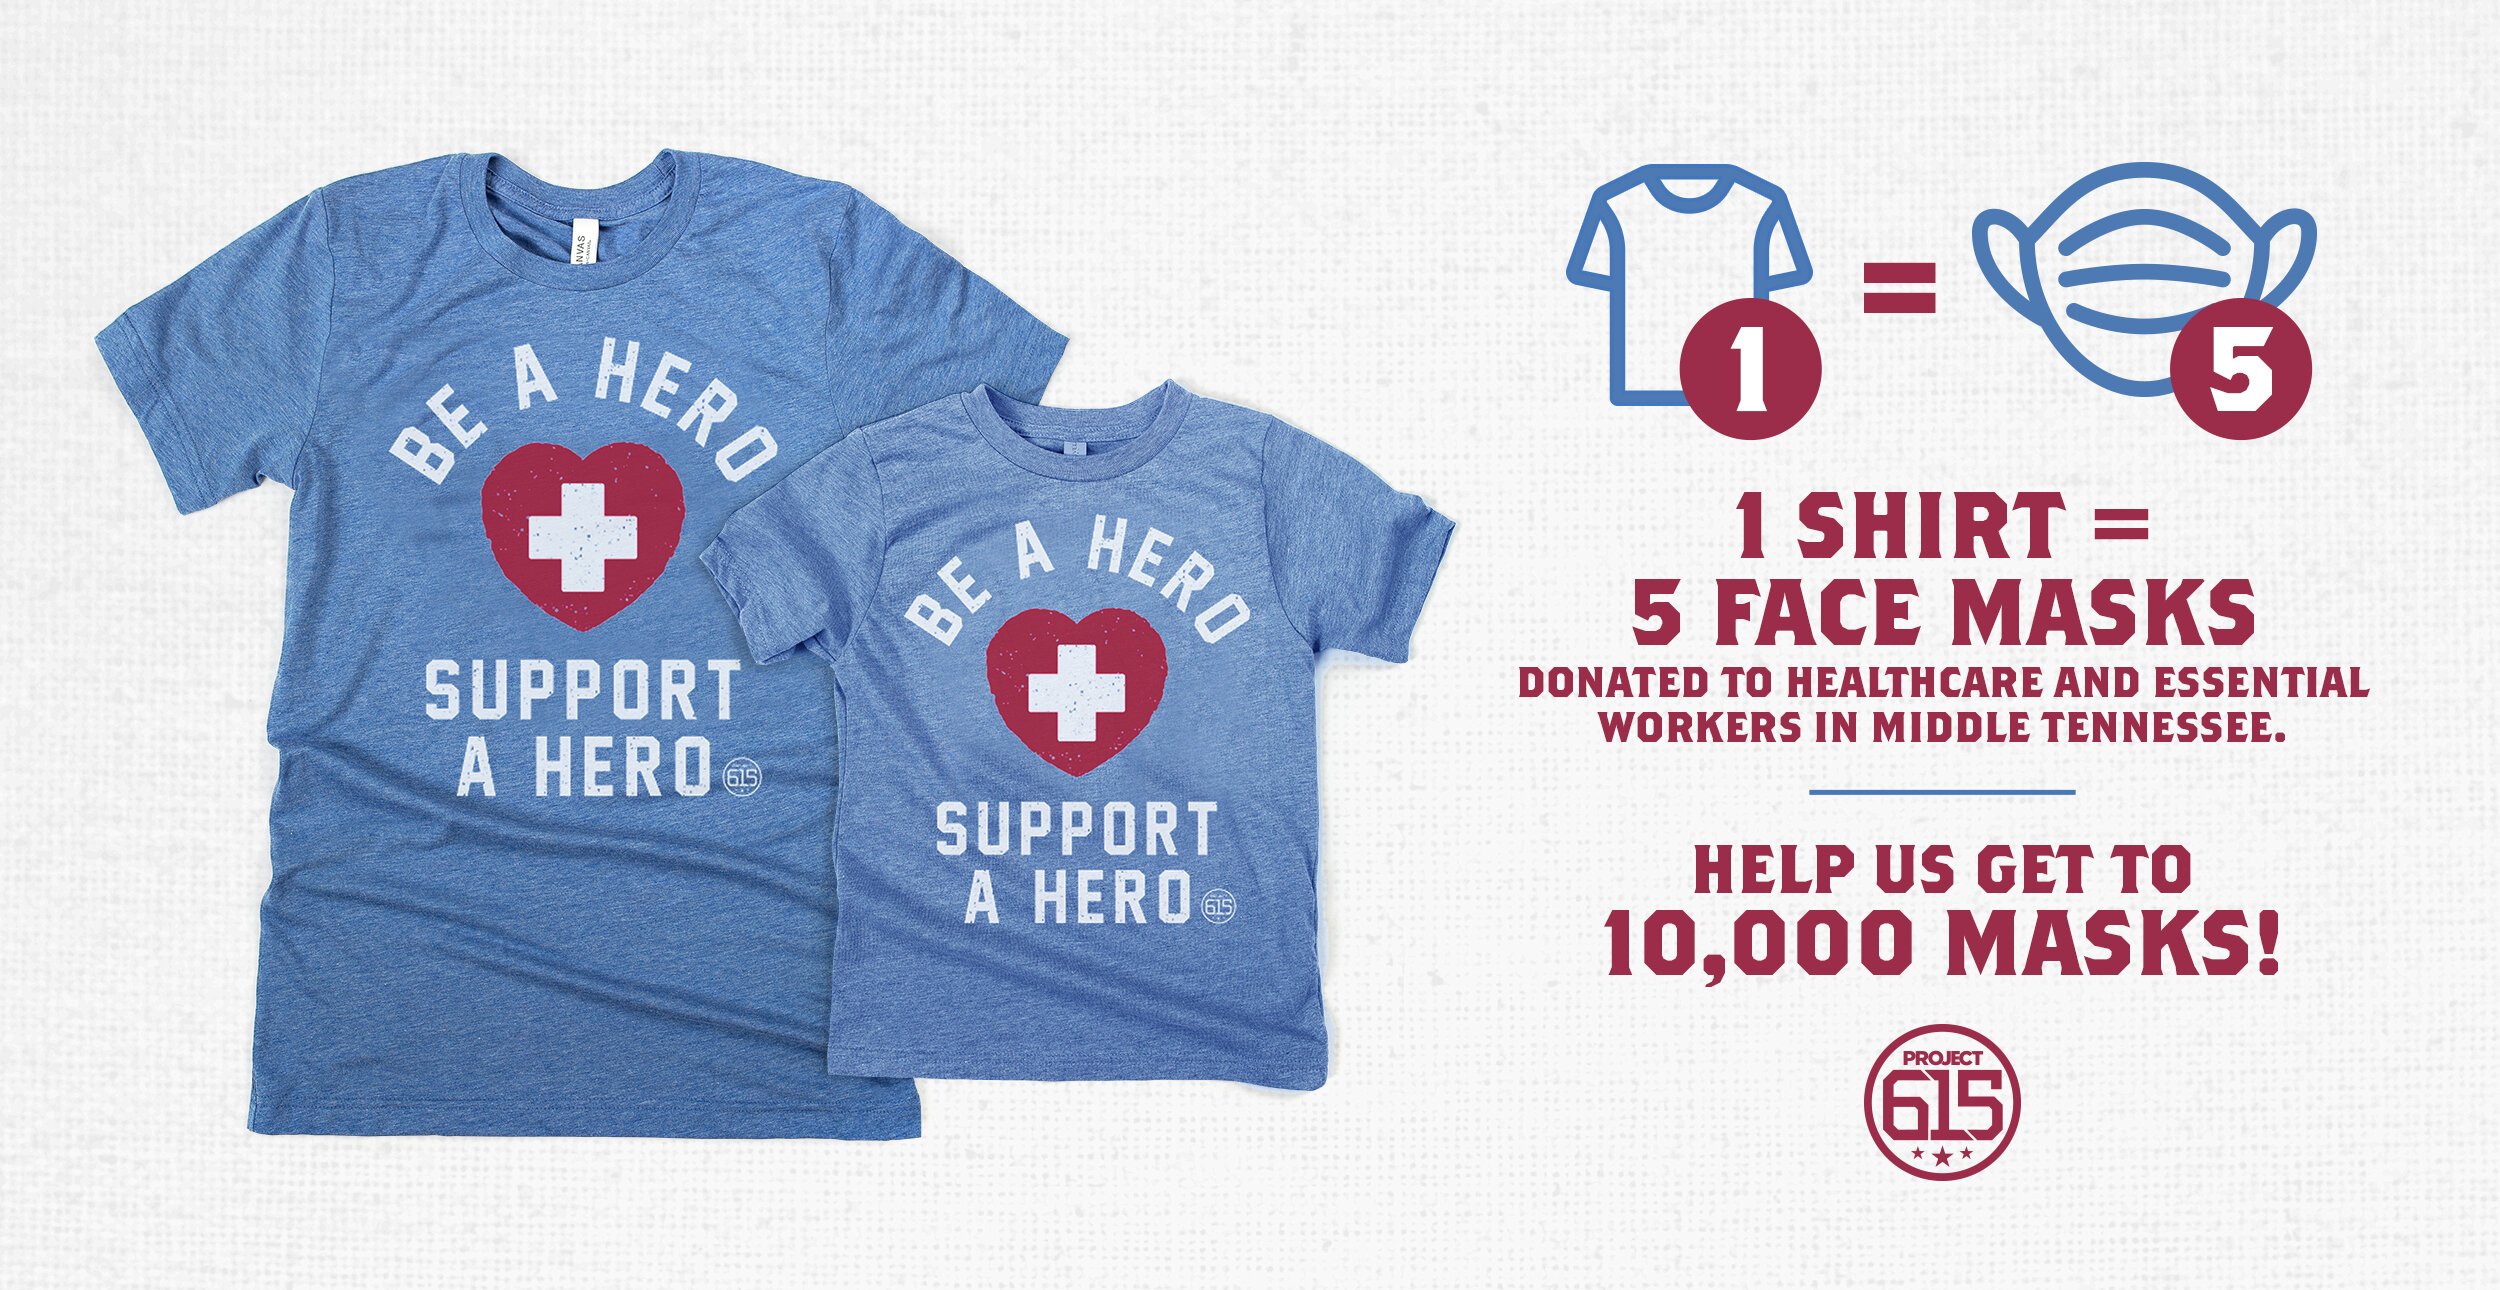 Project 615 Be a Hero Support a Hero shirt